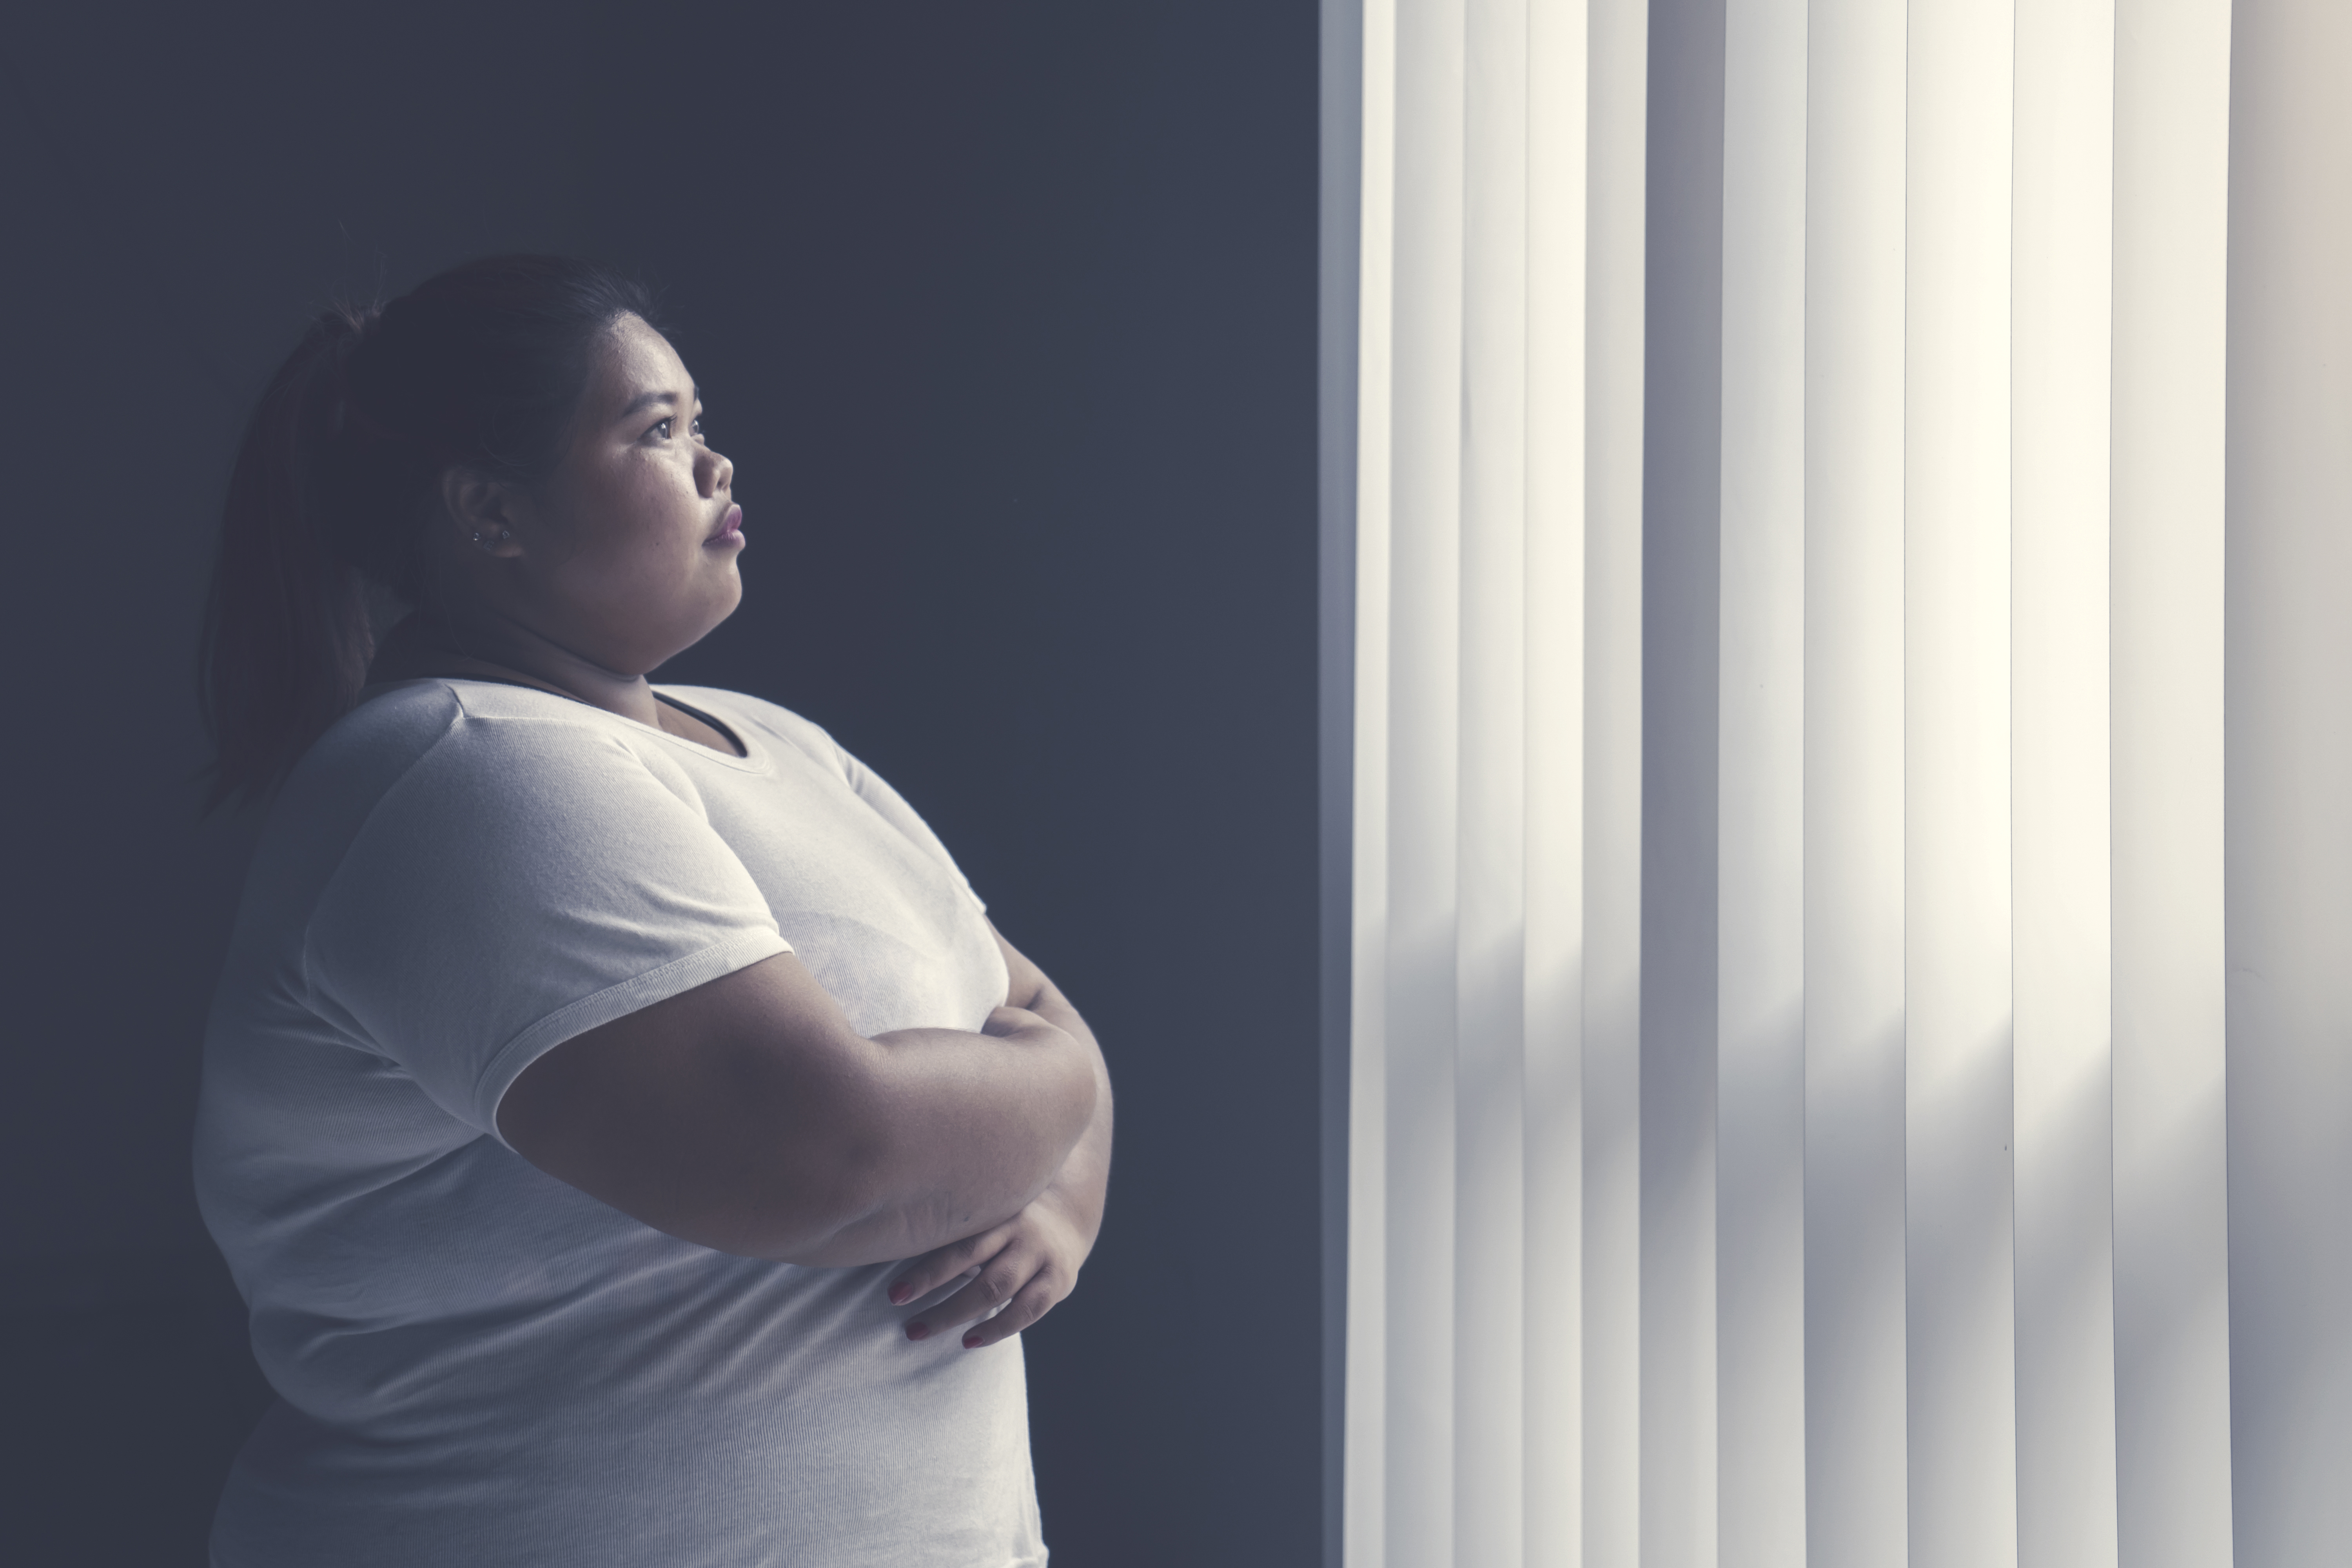 An overweight woman looks out a window